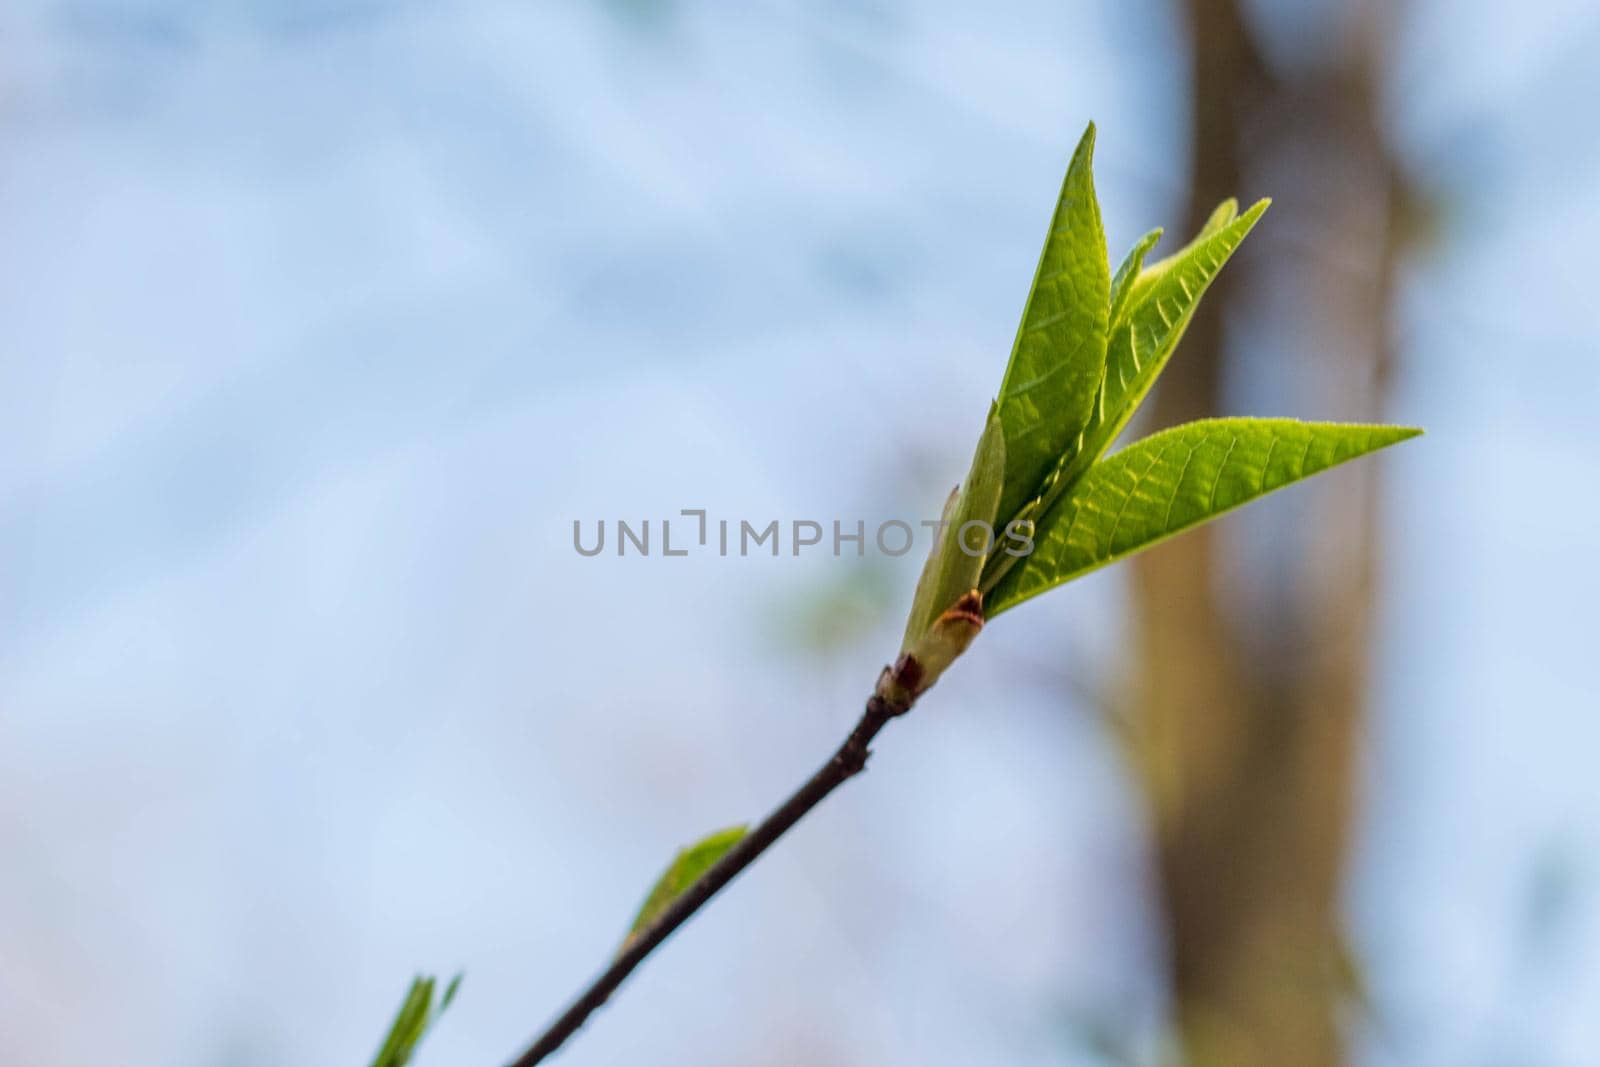 The first spring gentle leaves, buds and branches macro blurred background.